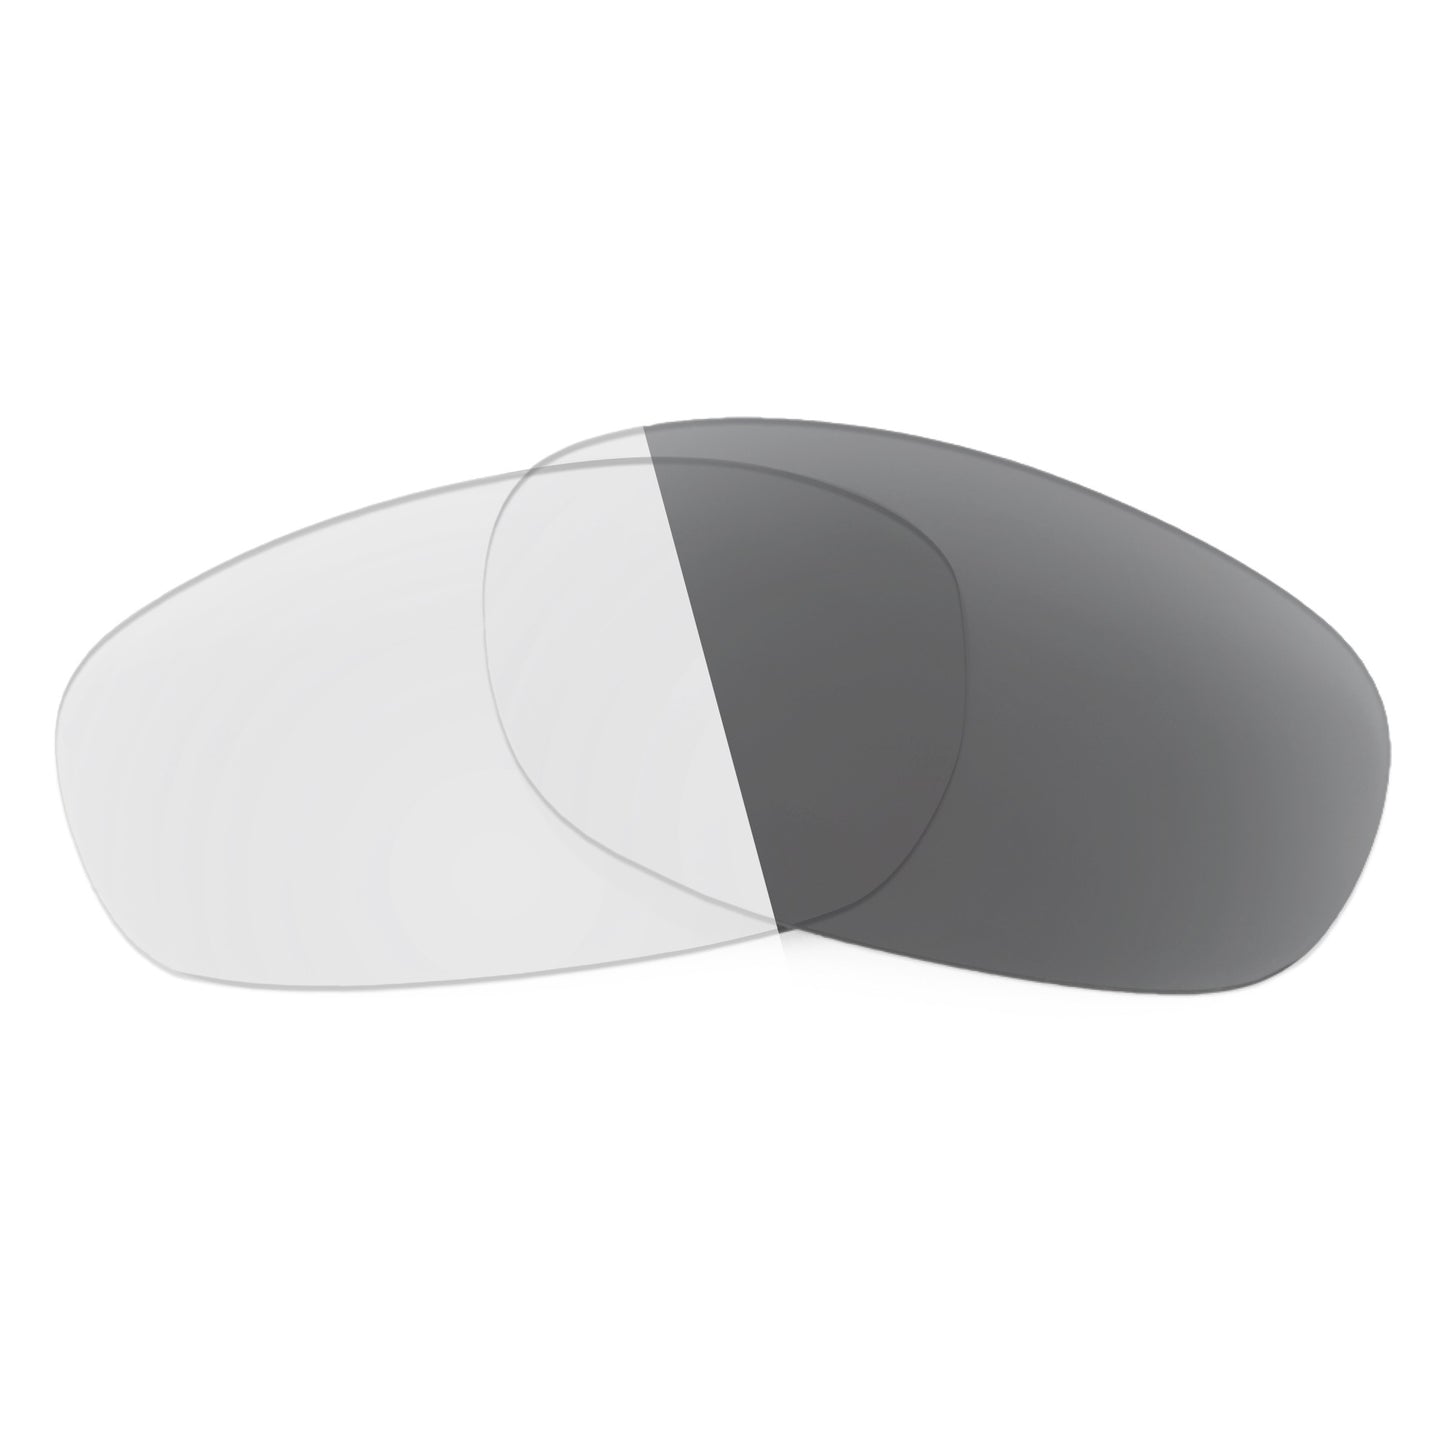 Revant replacement lenses for Smith Pivlock Overdrive Non-Polarized Adapt Gray Photochromic